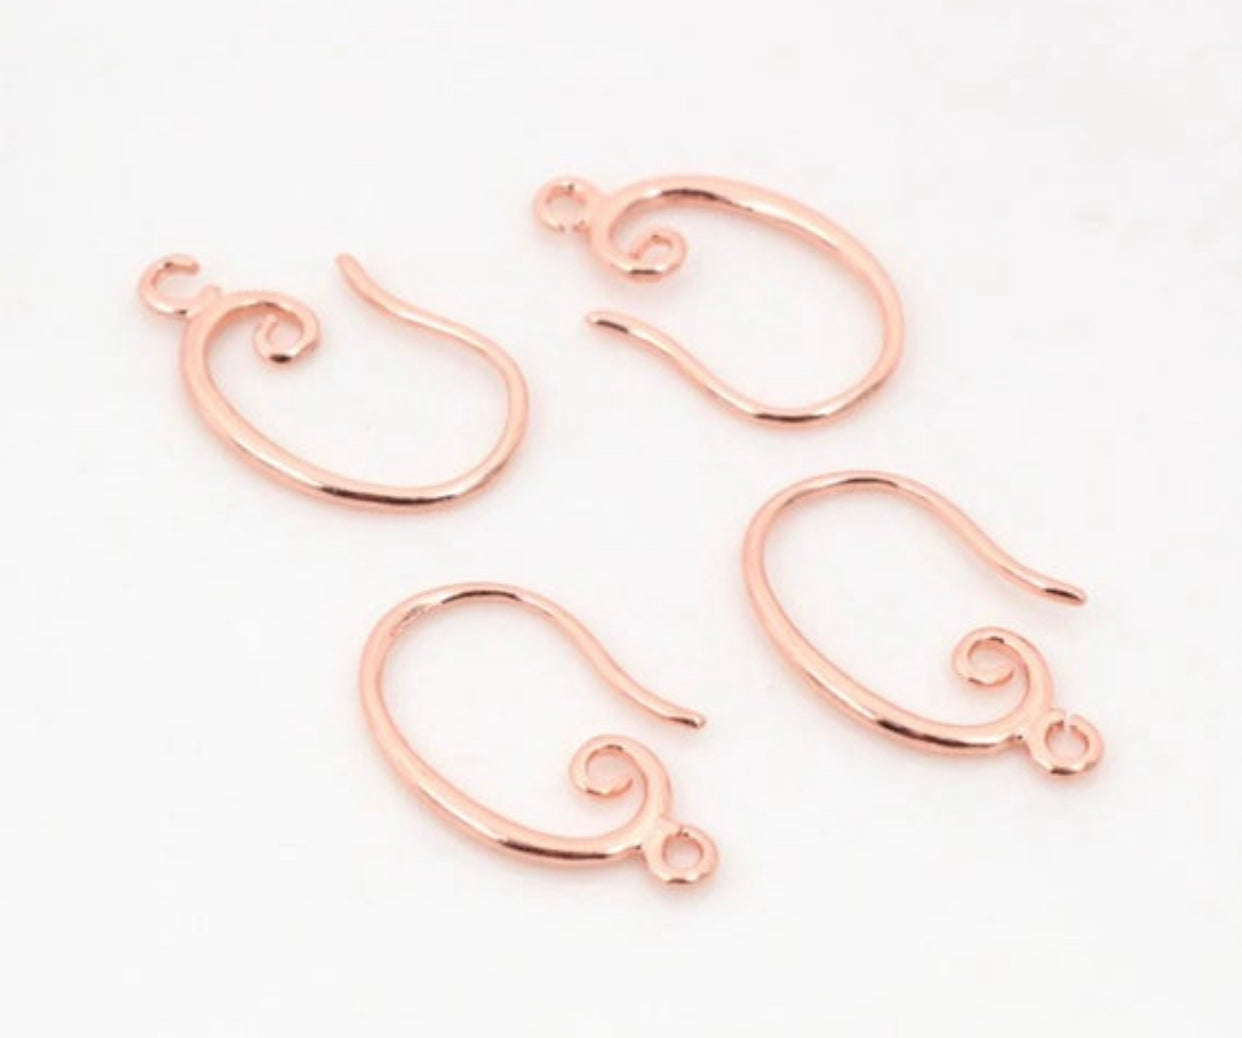 1 pair (2pcs), 27x18mm,  Lead Free and Nickel Free Copper Ear Hooks Earring Wires in Rose Gold